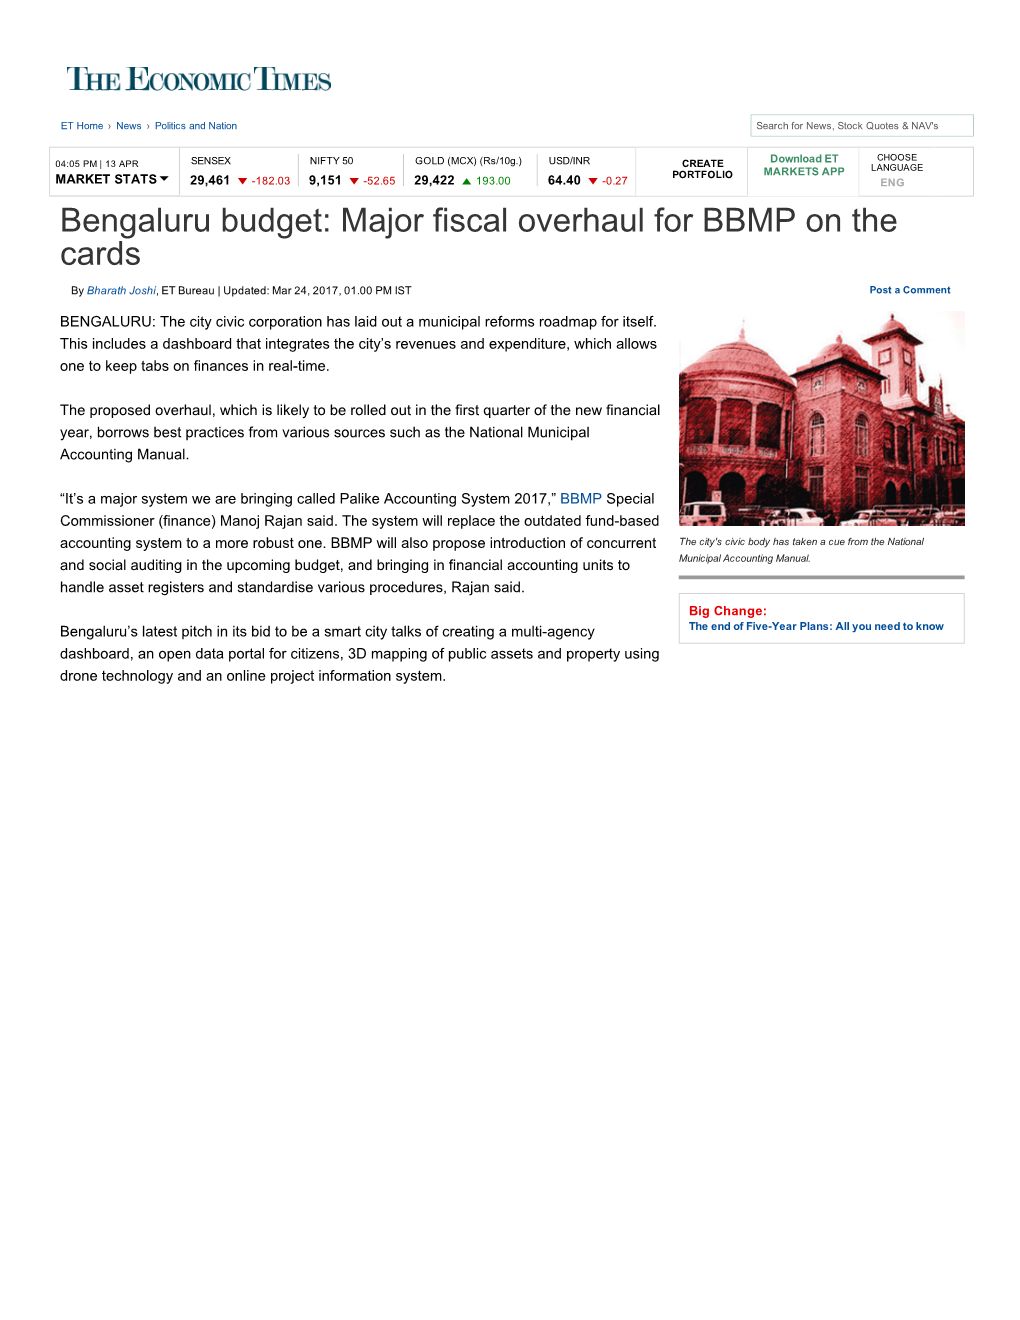 Bengaluru Budget: Major Fiscal Overhaul for BBMP on the Cards